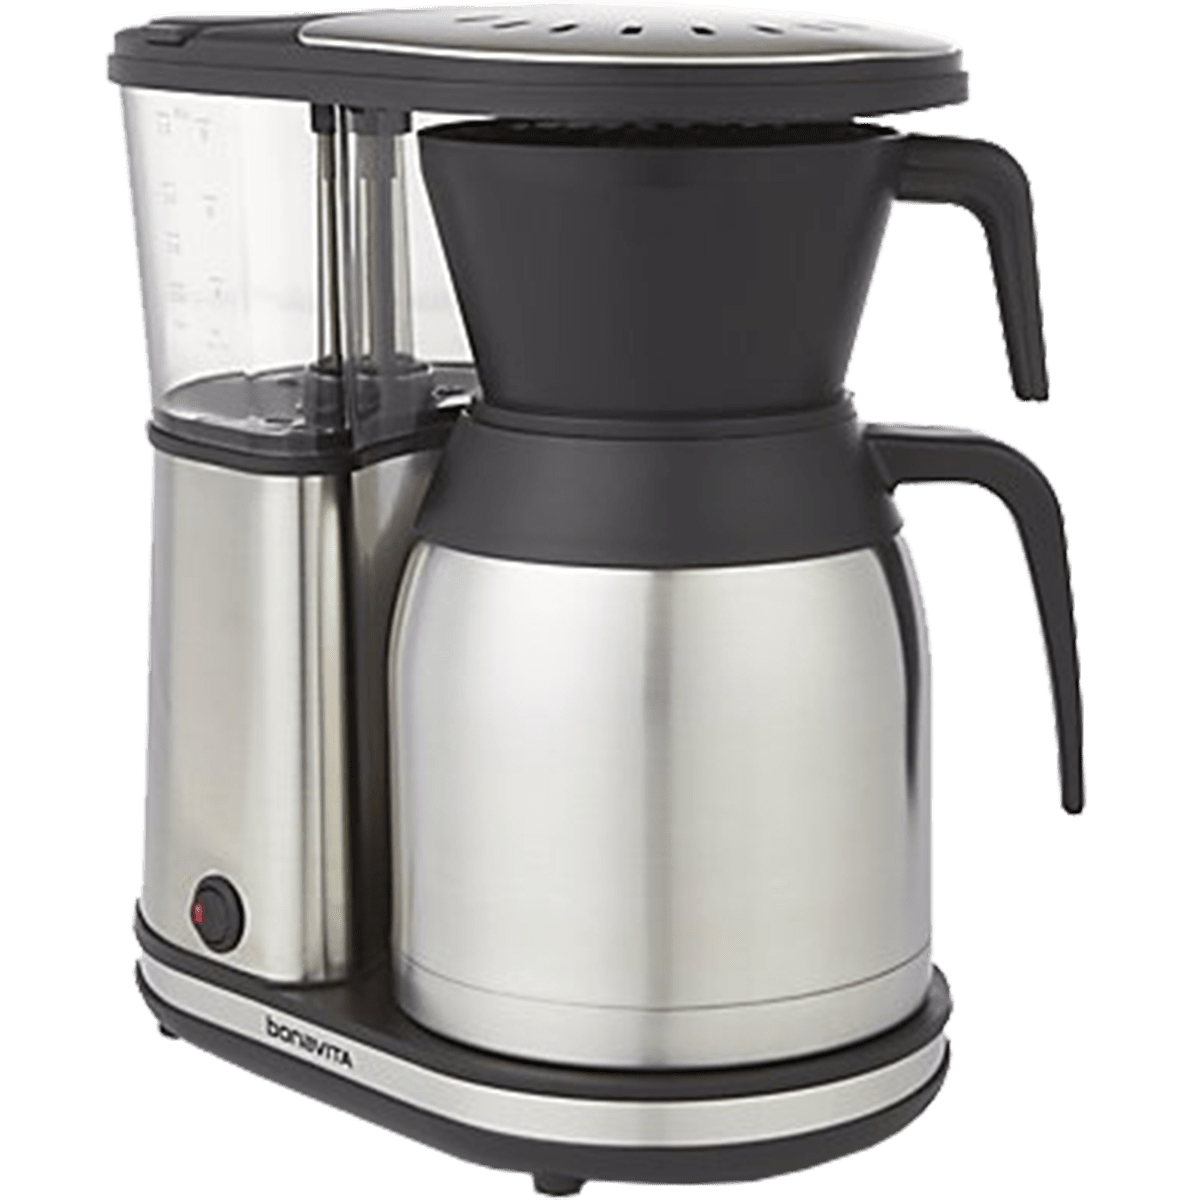 Bonavita BV1900TS New 8-cup Coffee Brewer with Stainless Steel